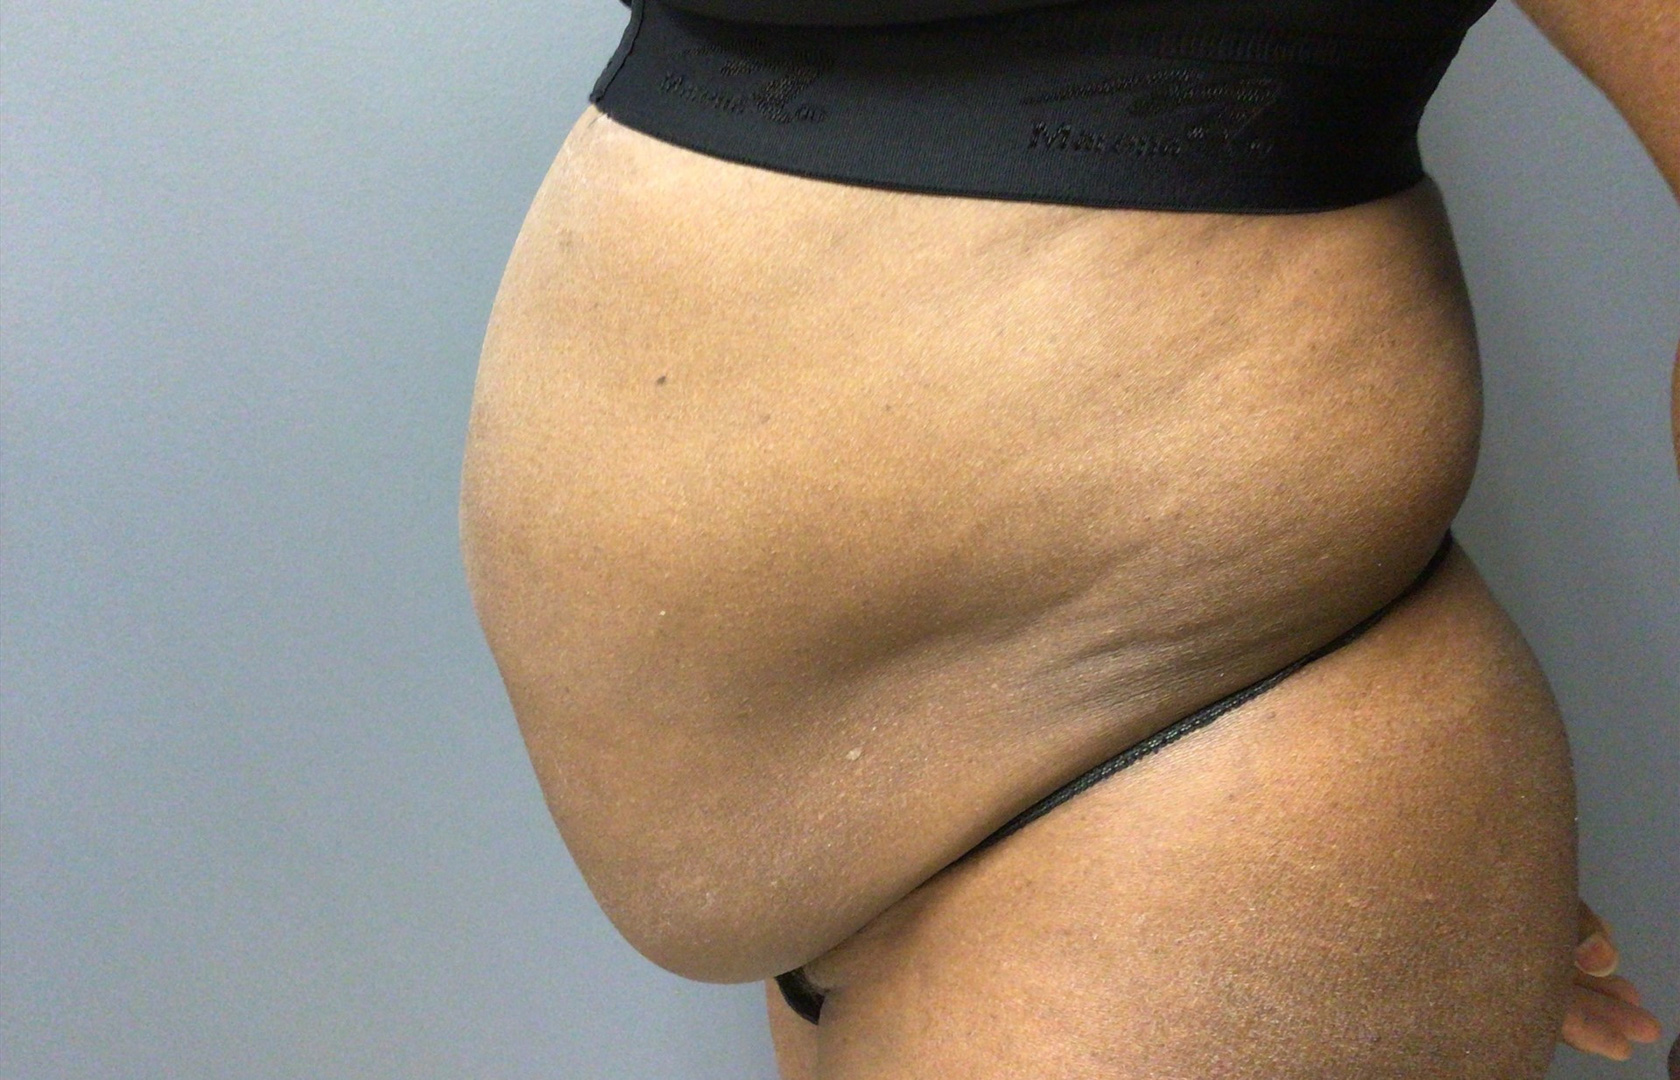 65 year old female left side view before surgery